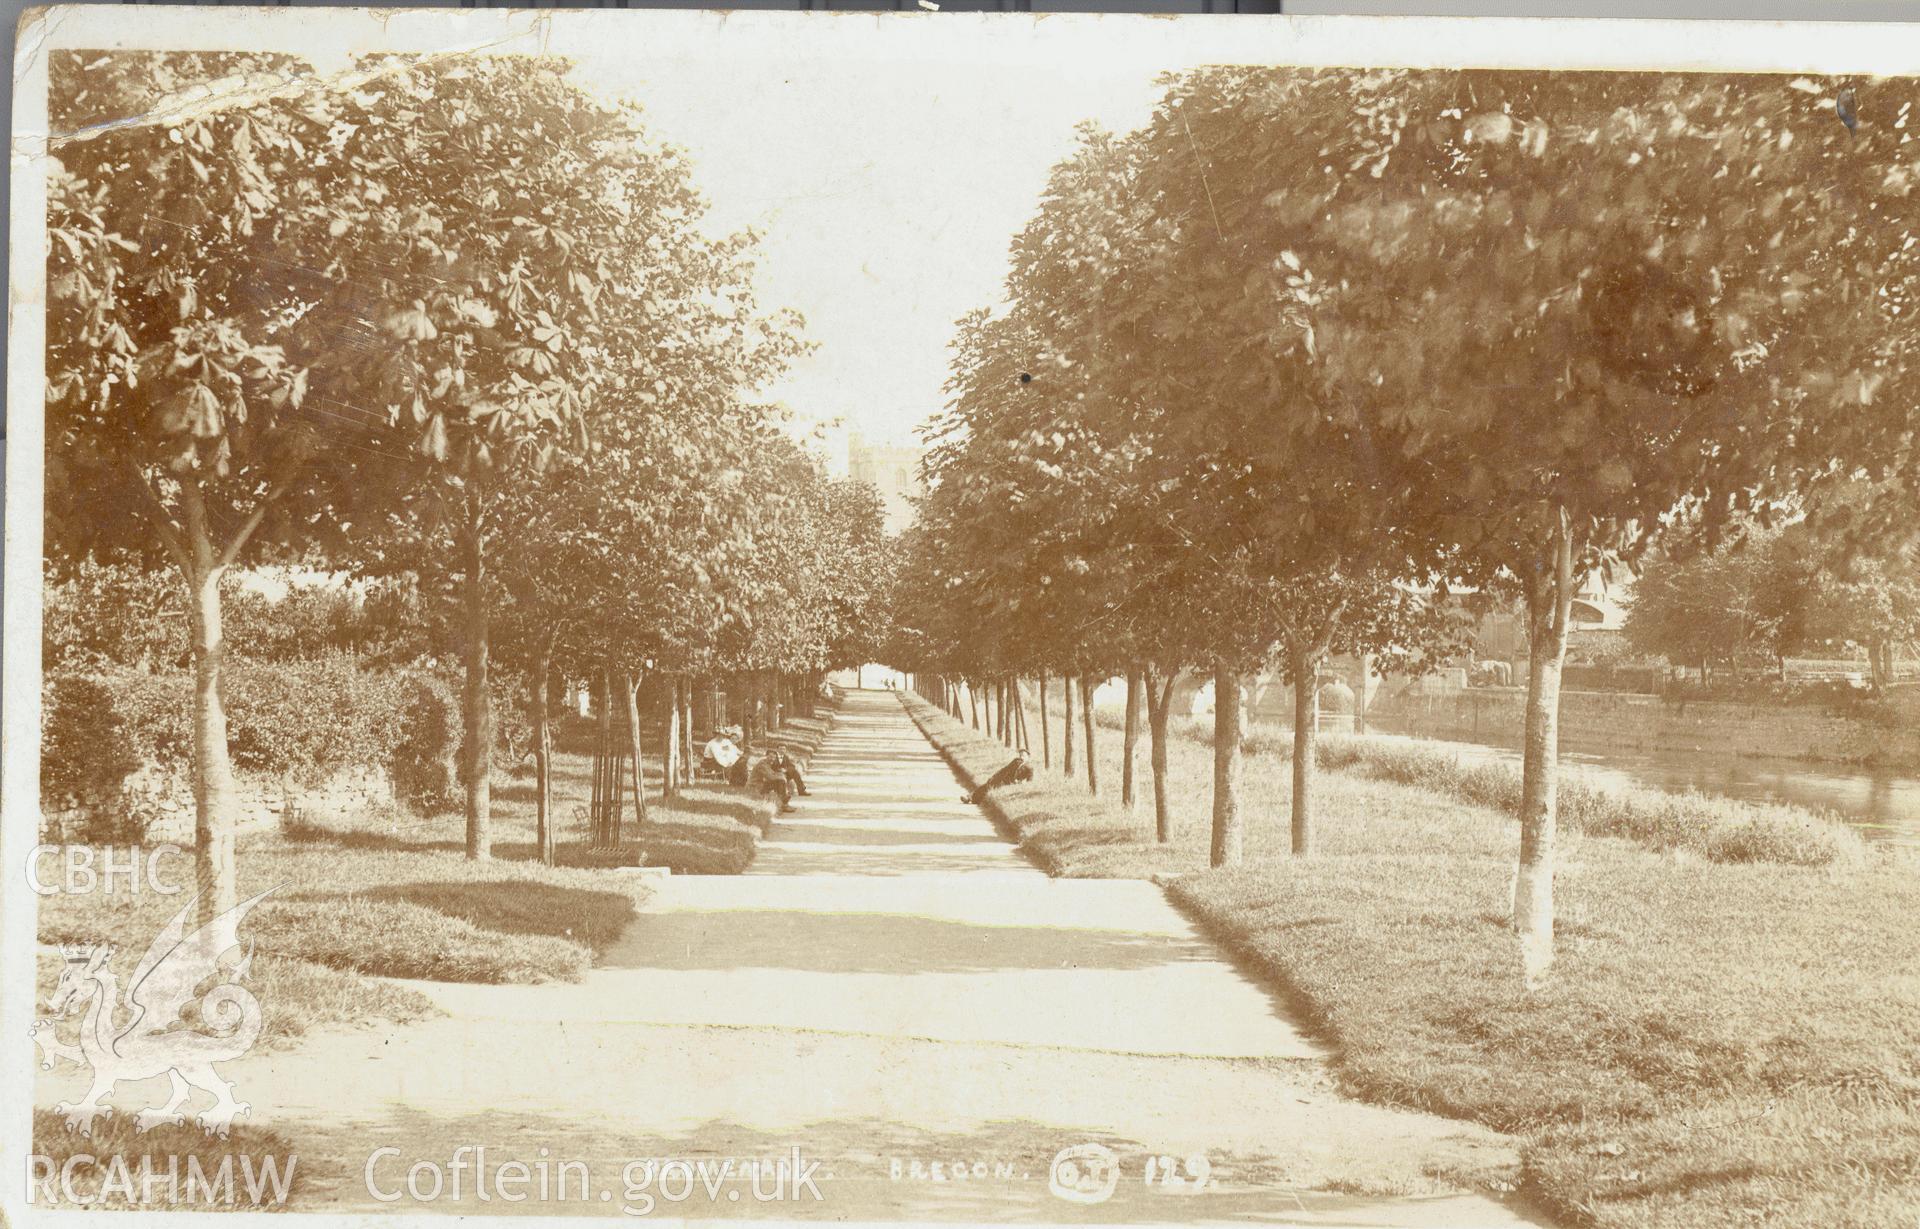 Digitised postcard image of Promenade, Brecon, O. Jackson, Brecon. Produced by Parks and Gardens Data Services, from an original item in the Peter Davis Collection at Parks and Gardens UK. We hold only web-resolution images of this collection, suitable for viewing on screen and for research purposes only. We do not hold the original images, or publication quality scans.